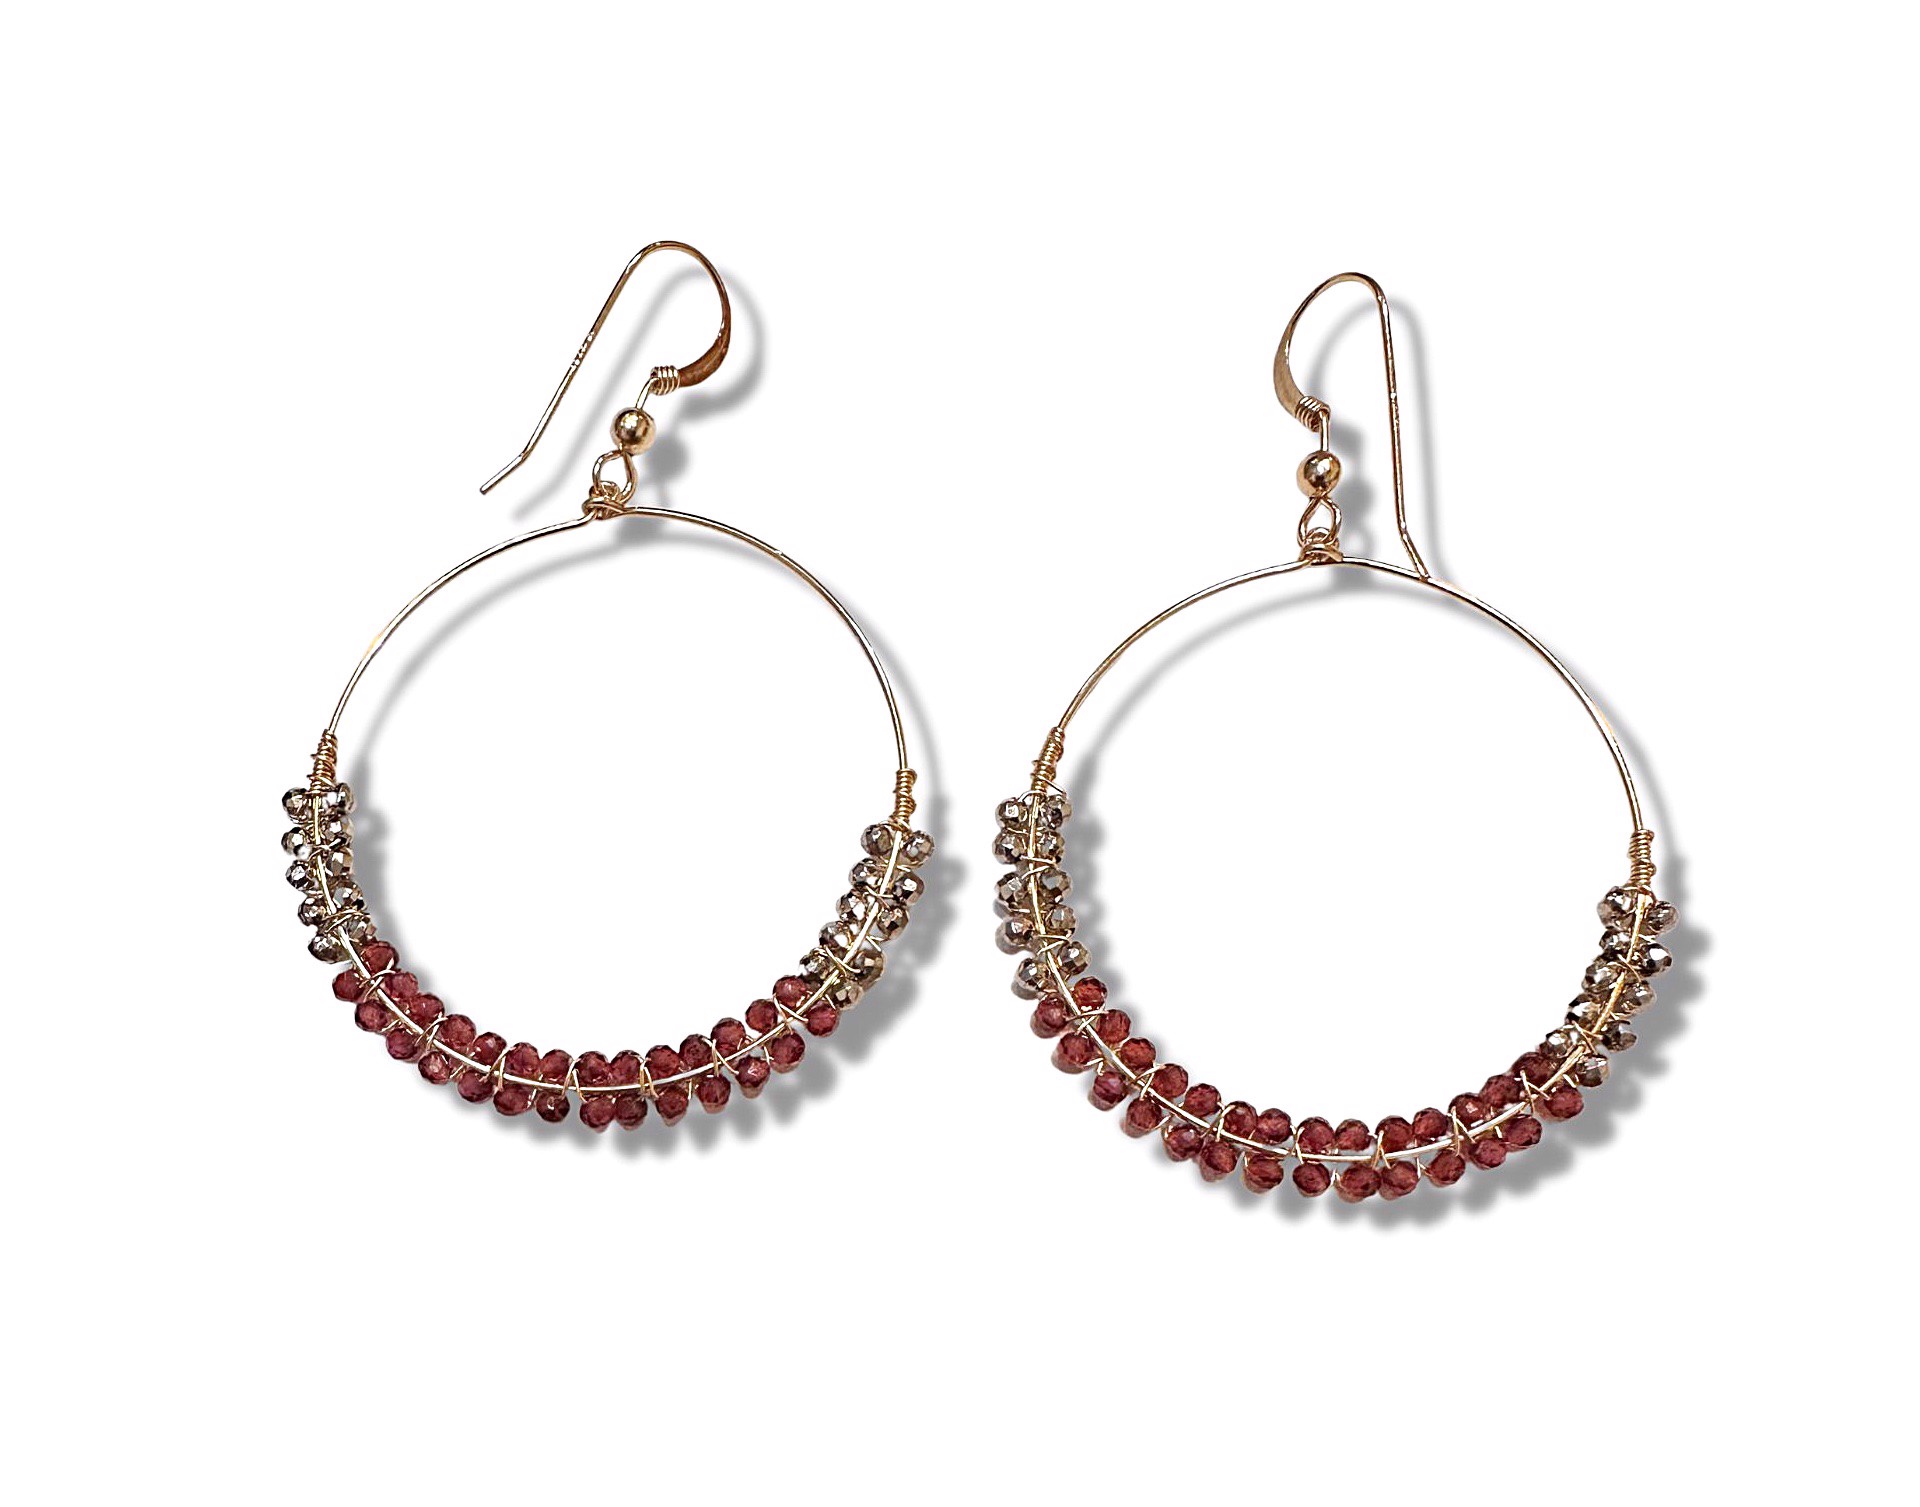 Earrings - Garnet and Pyrite with 14K Gold Filling by Julia Balestracci